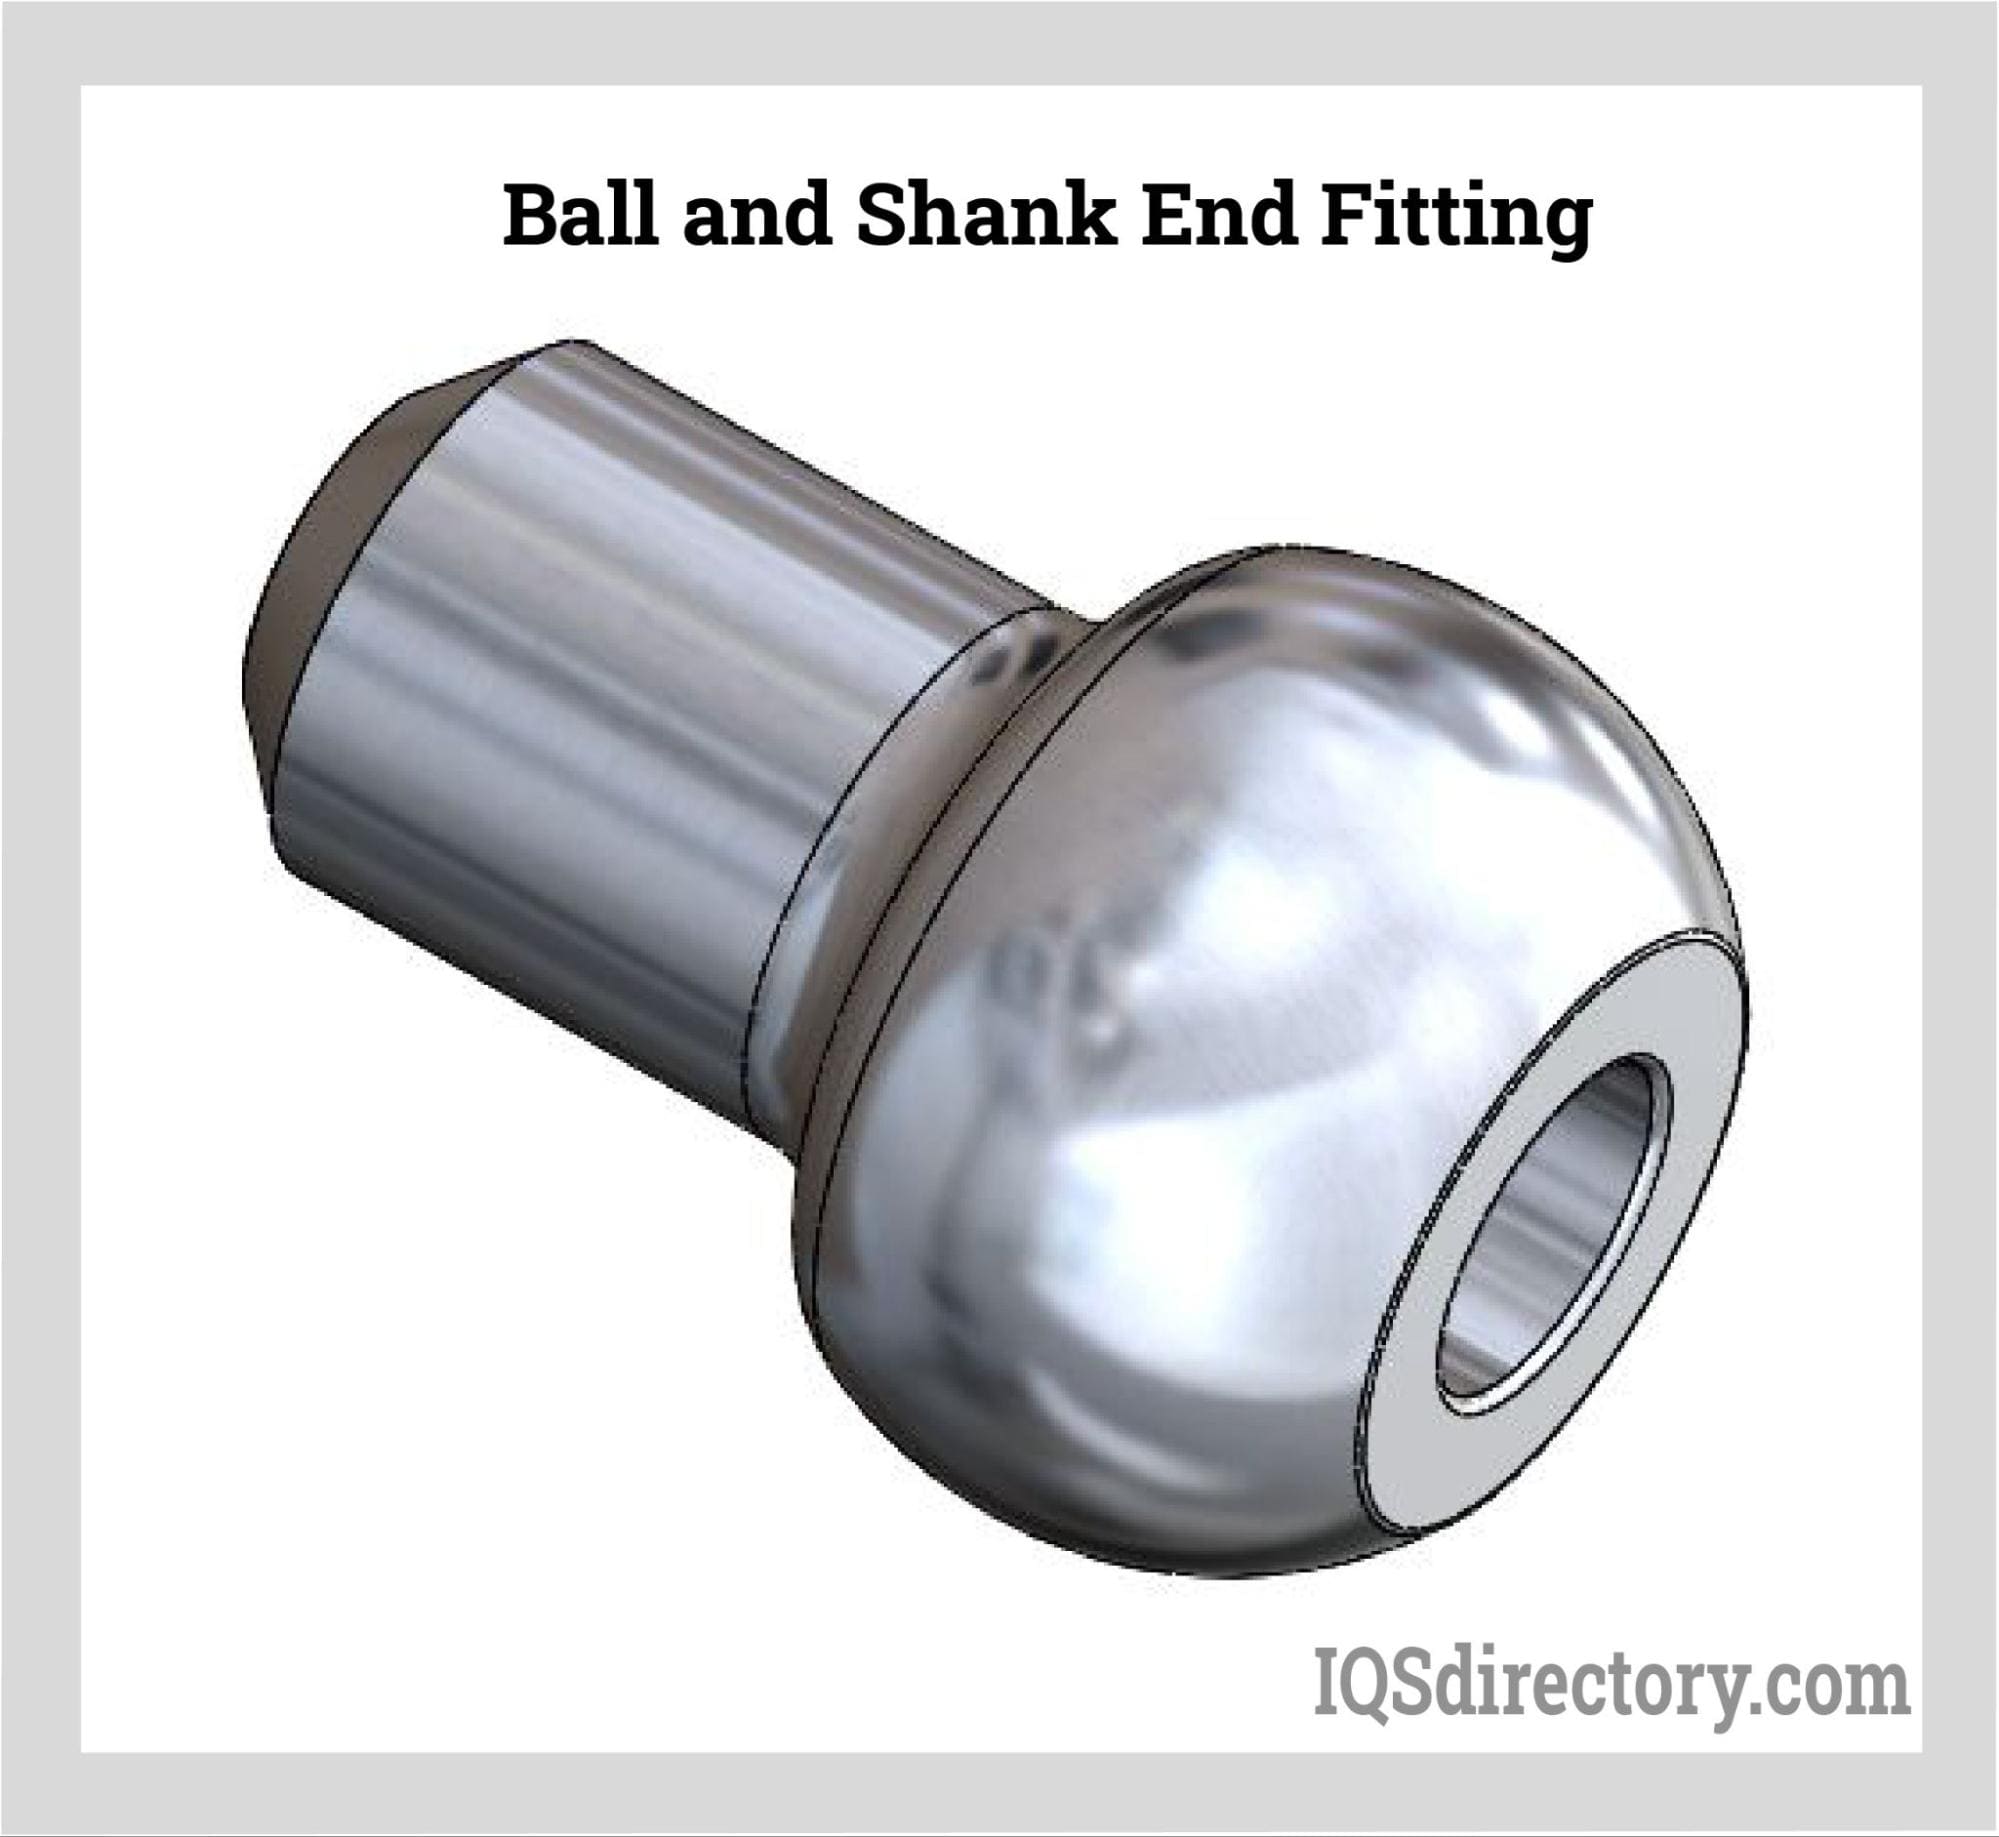 Ball and Shank End Fitting